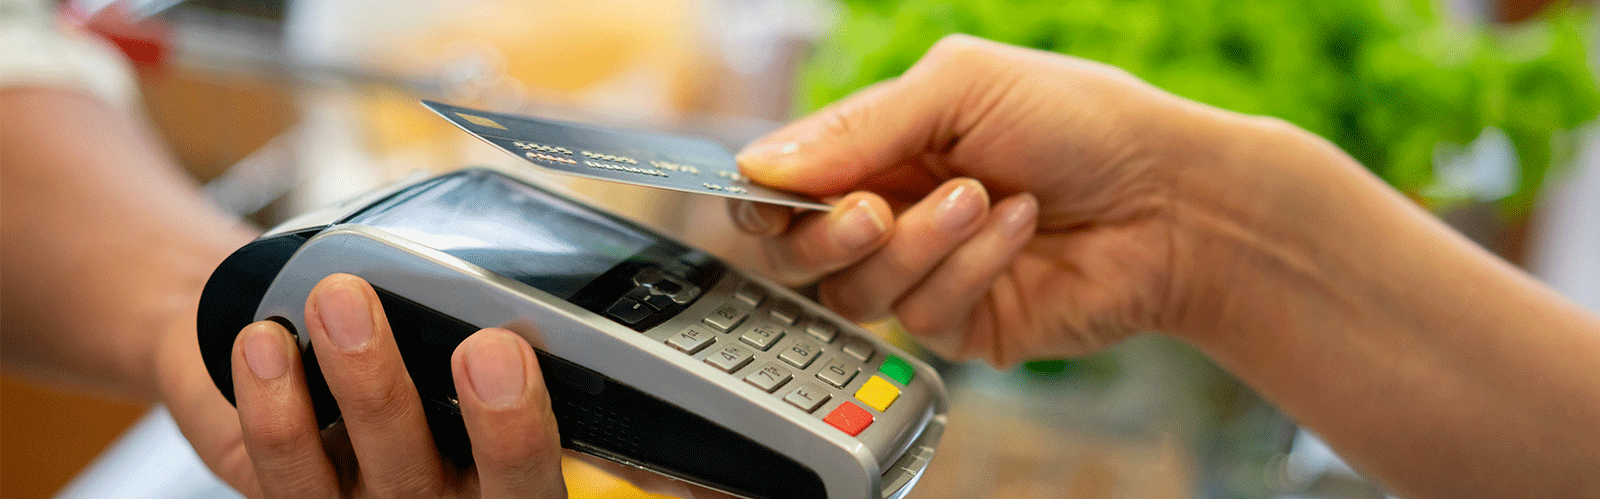 person using chip reader with their credit card